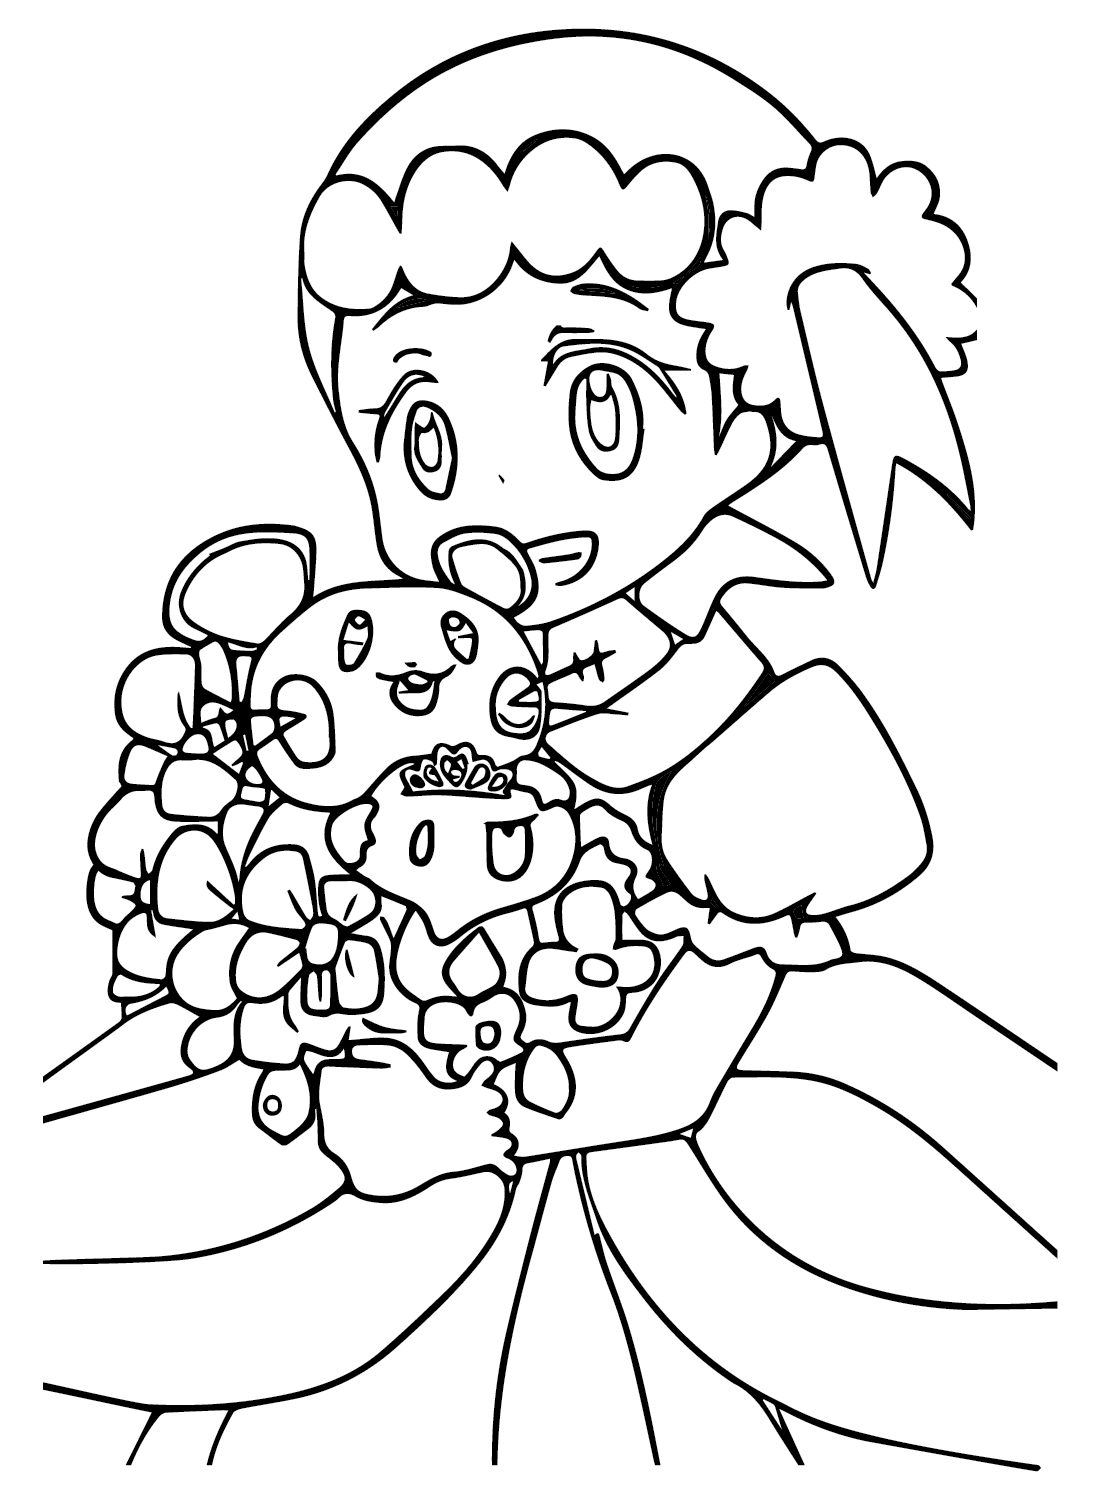 Drawing Bonnie Pokemon Coloring Page from Bonnie Pokemon